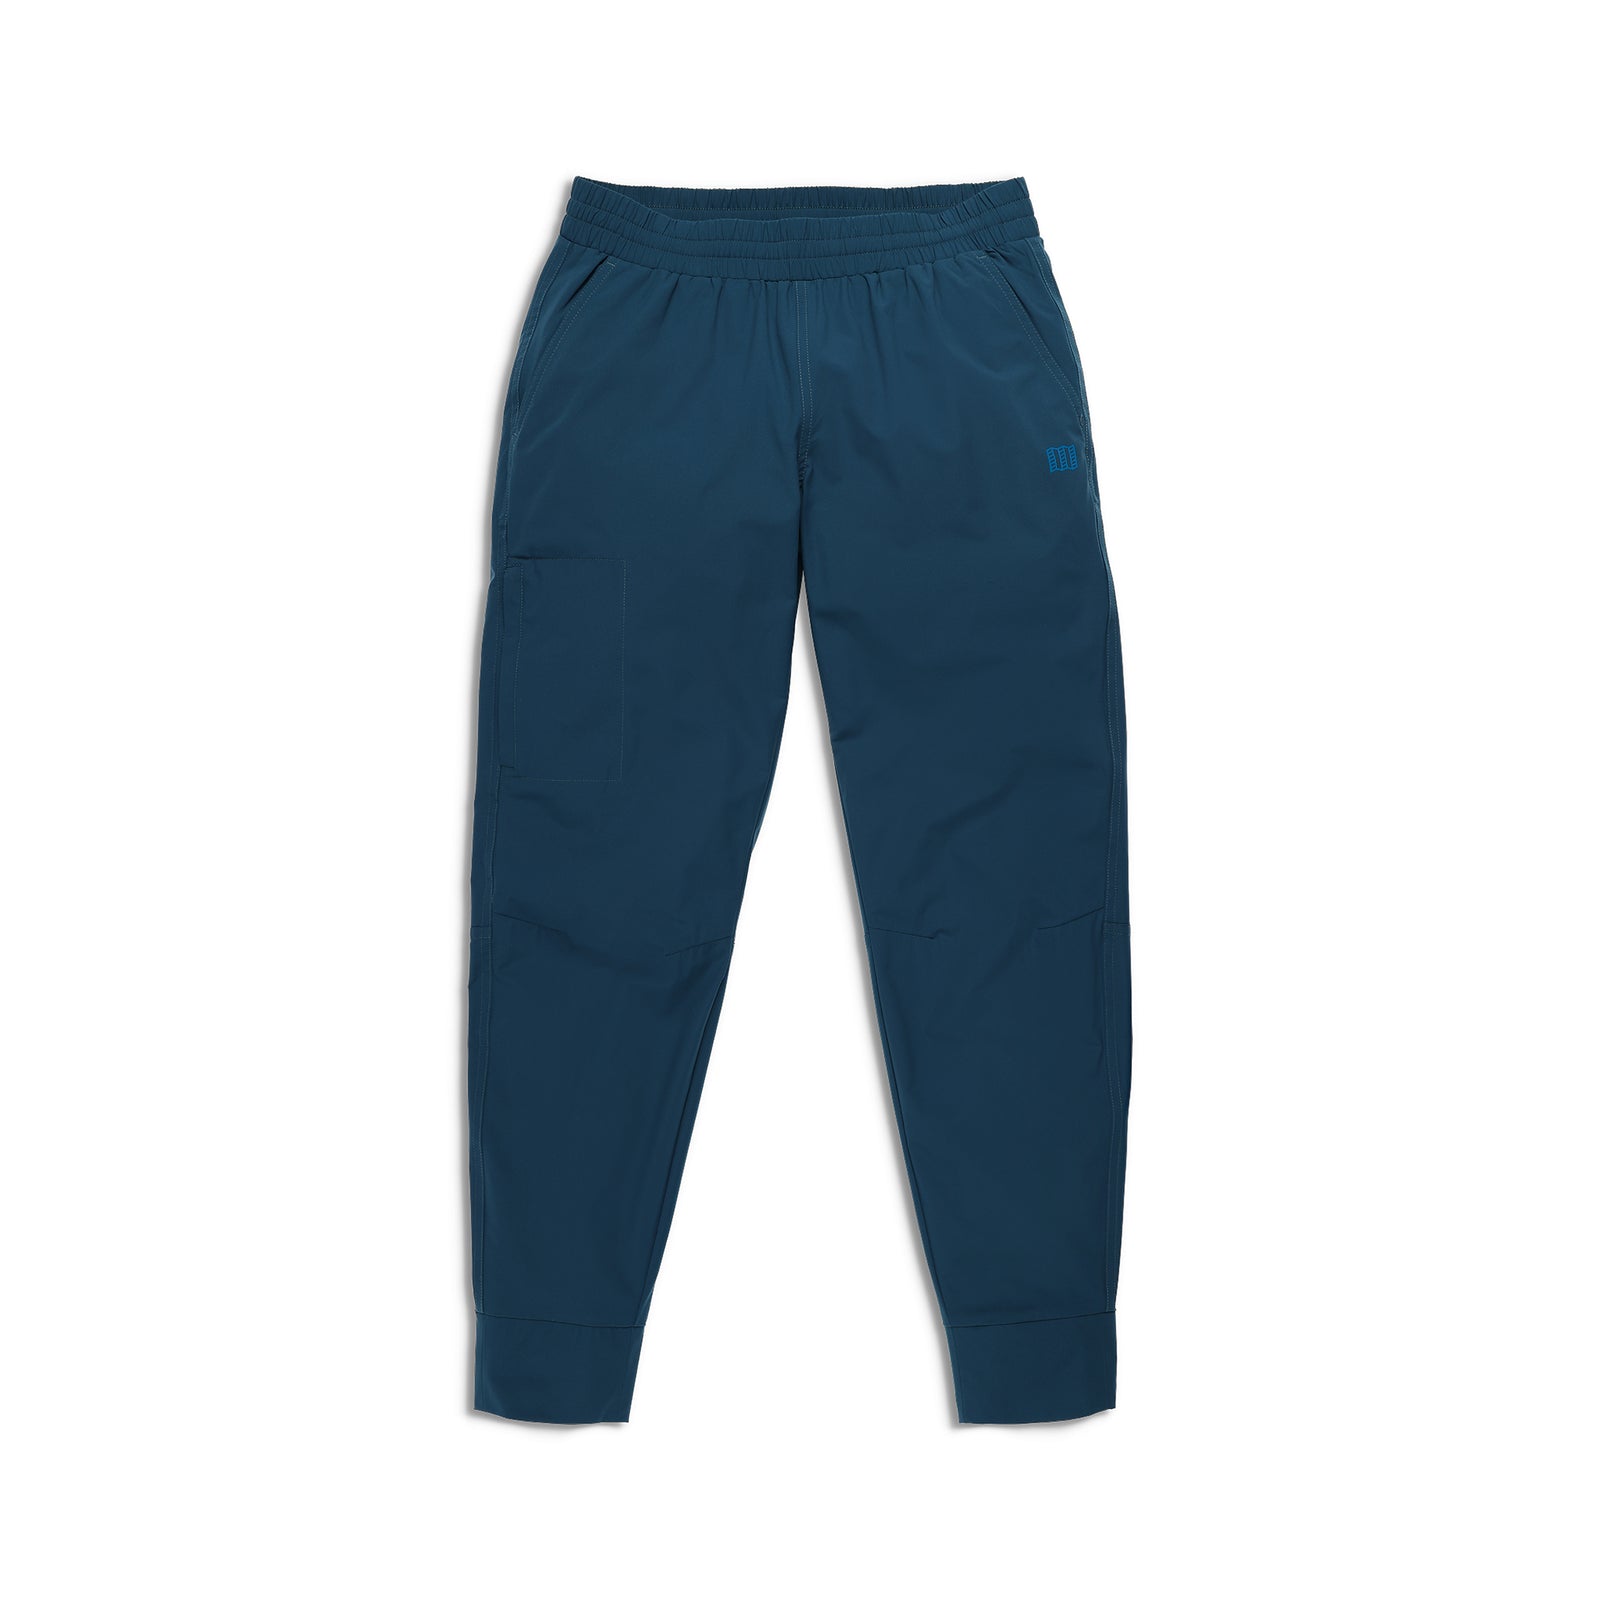 Front View of Topo Designs Global Jogger - Women's in "Pond Blue"